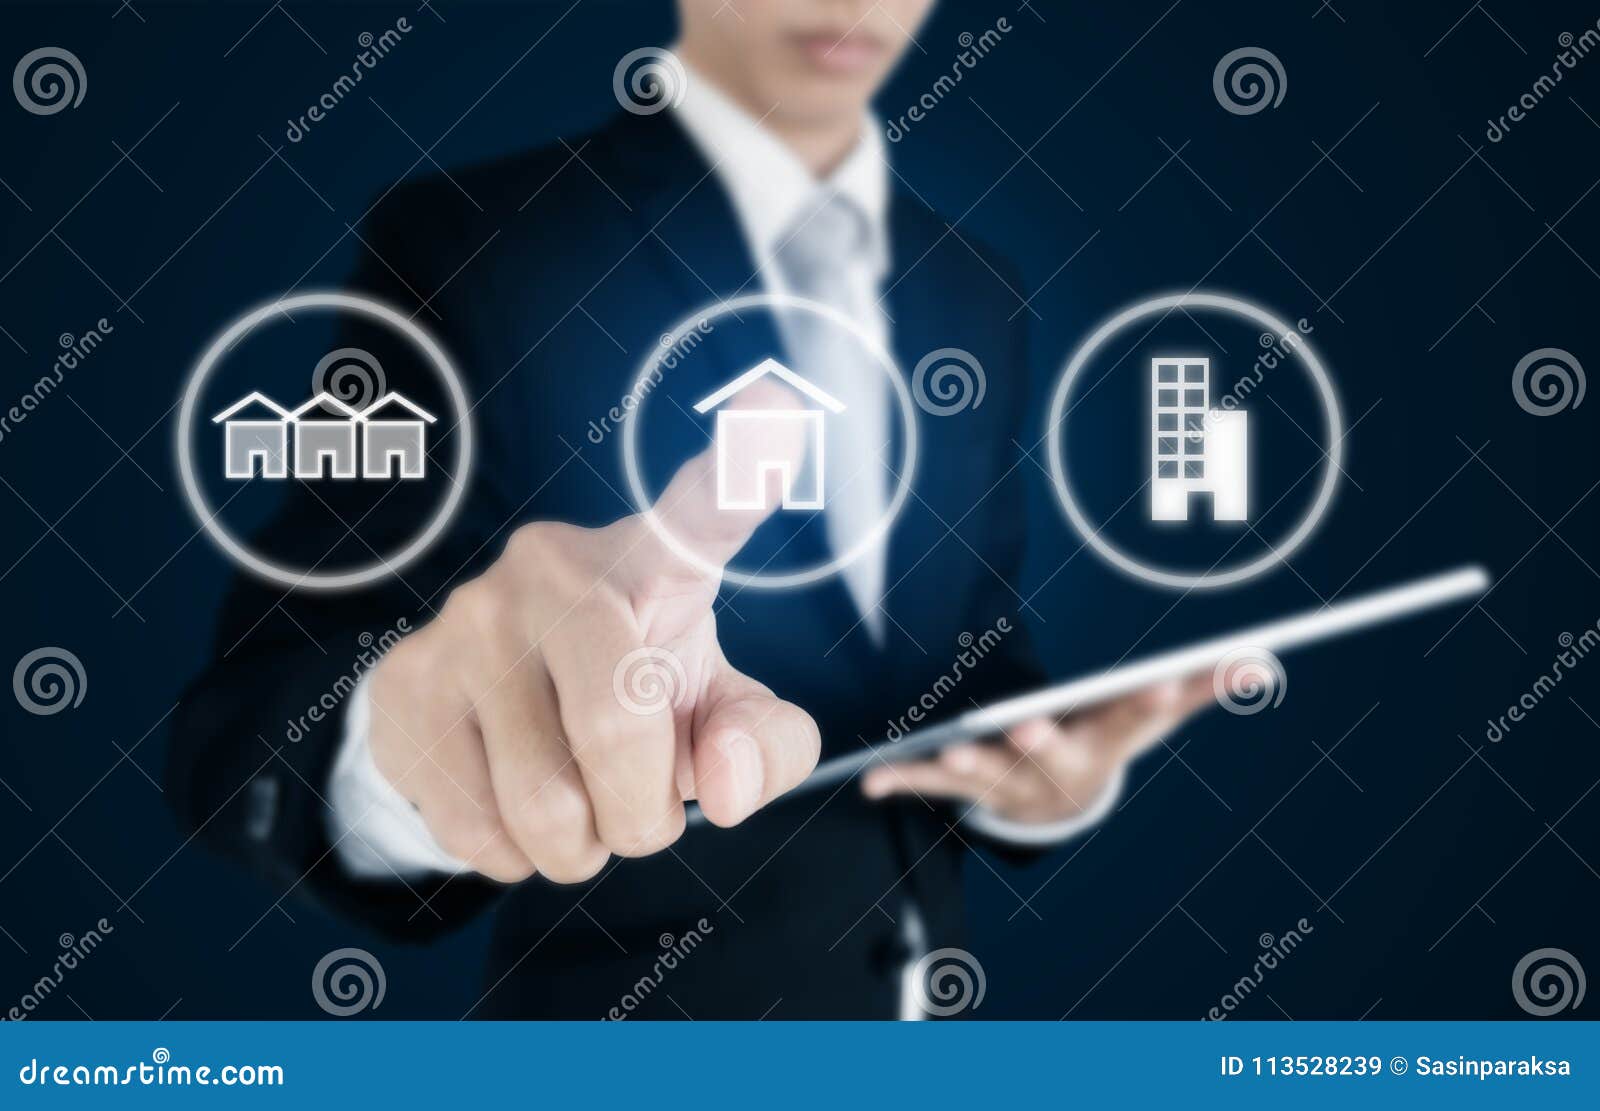 businessman pressing real estate icons on screen. business investment in real estate, town house, single home and condominium